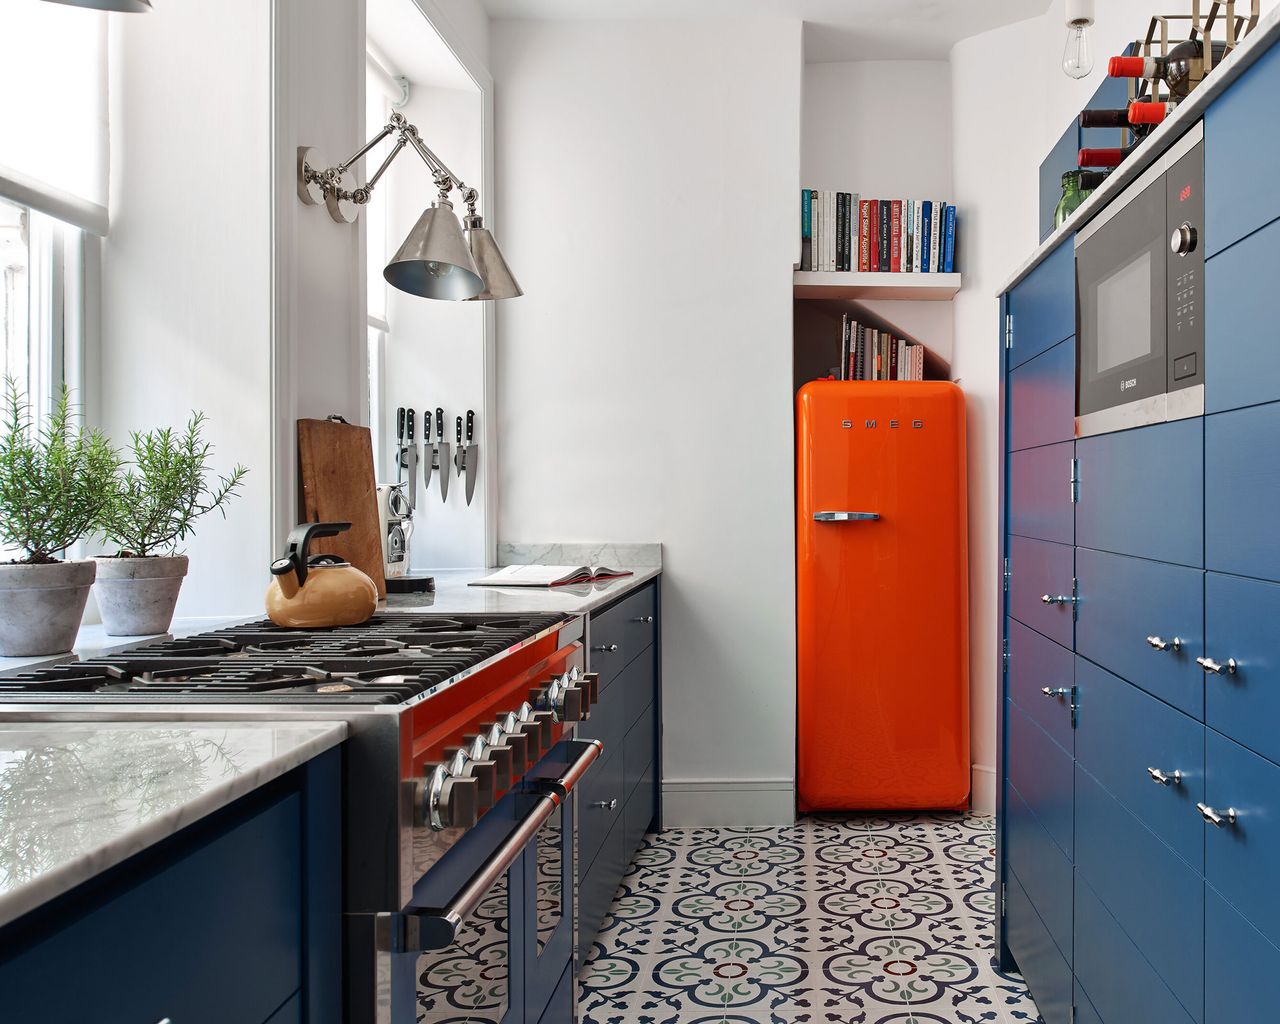 How to plan a layout for a small kitchen: an expert guide